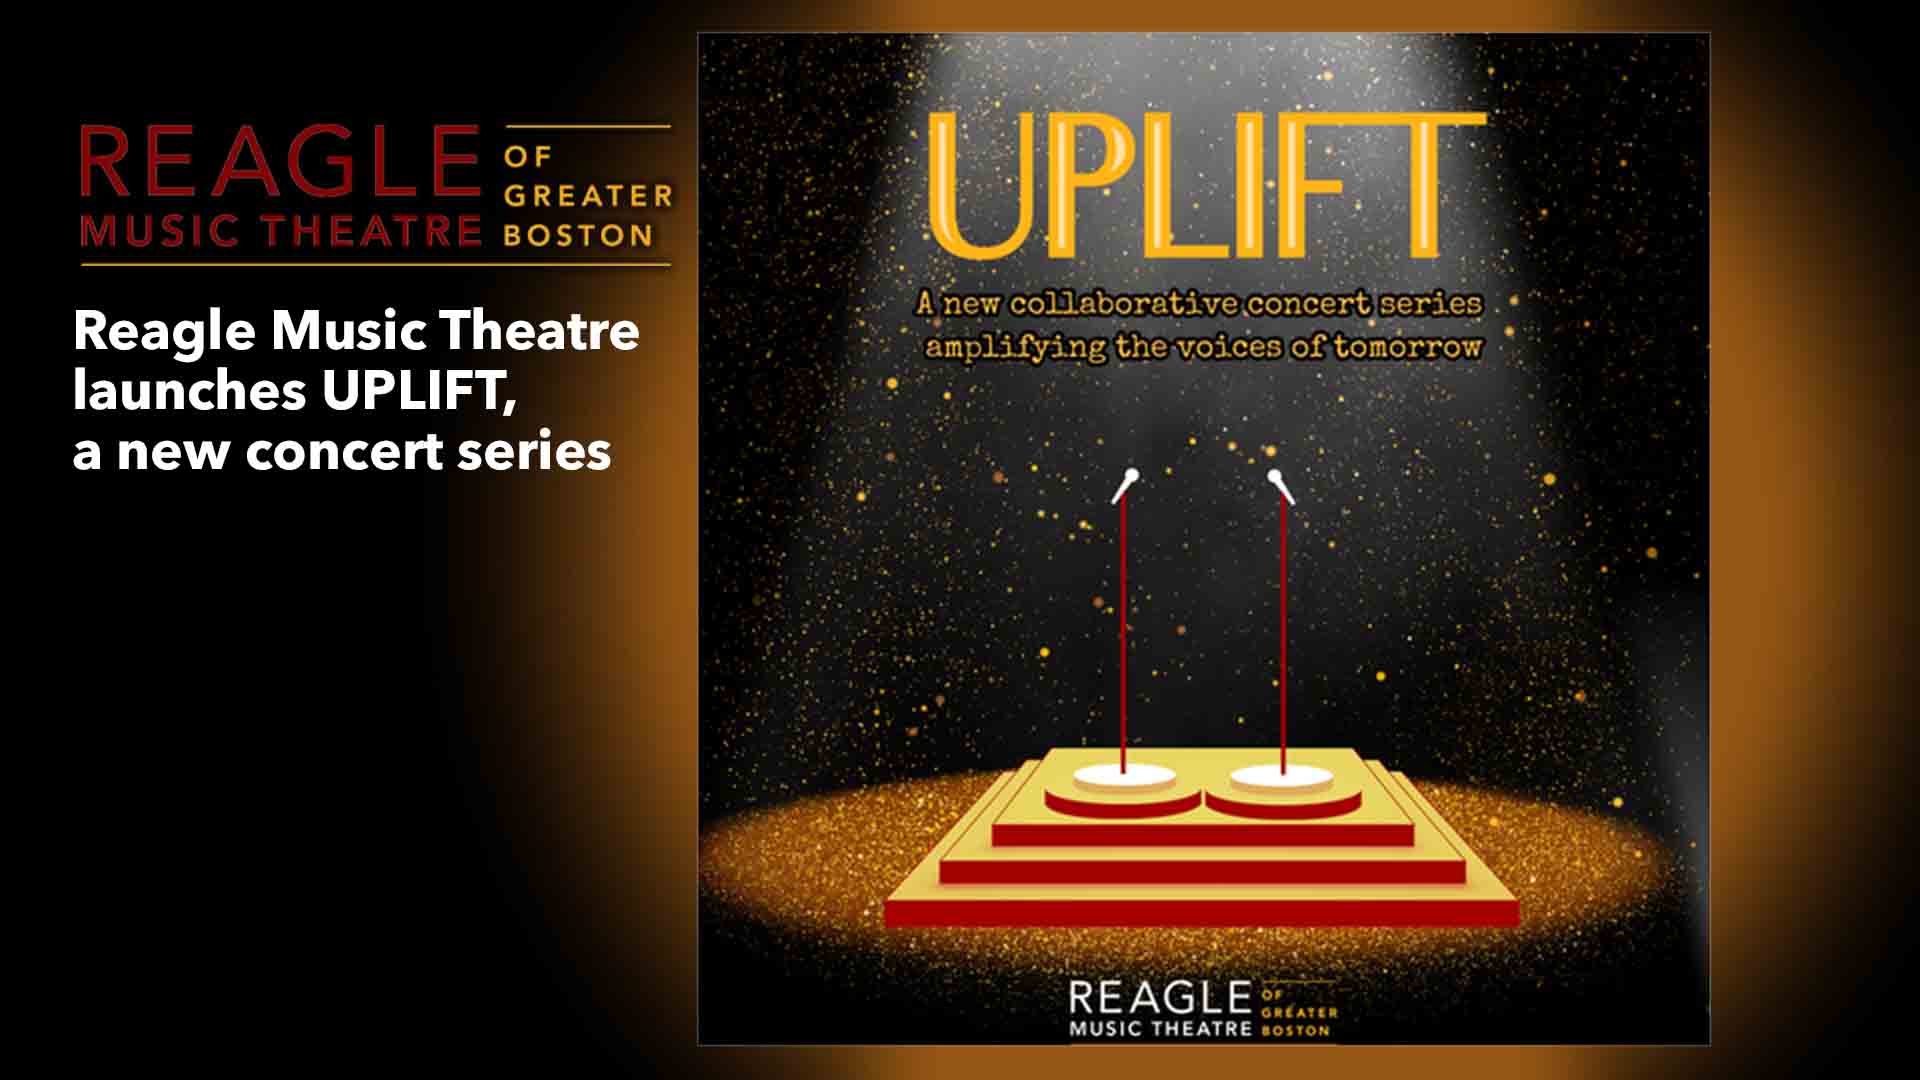 Reagle Music Theatre is excited to launch its new concert series called UPLIFT!